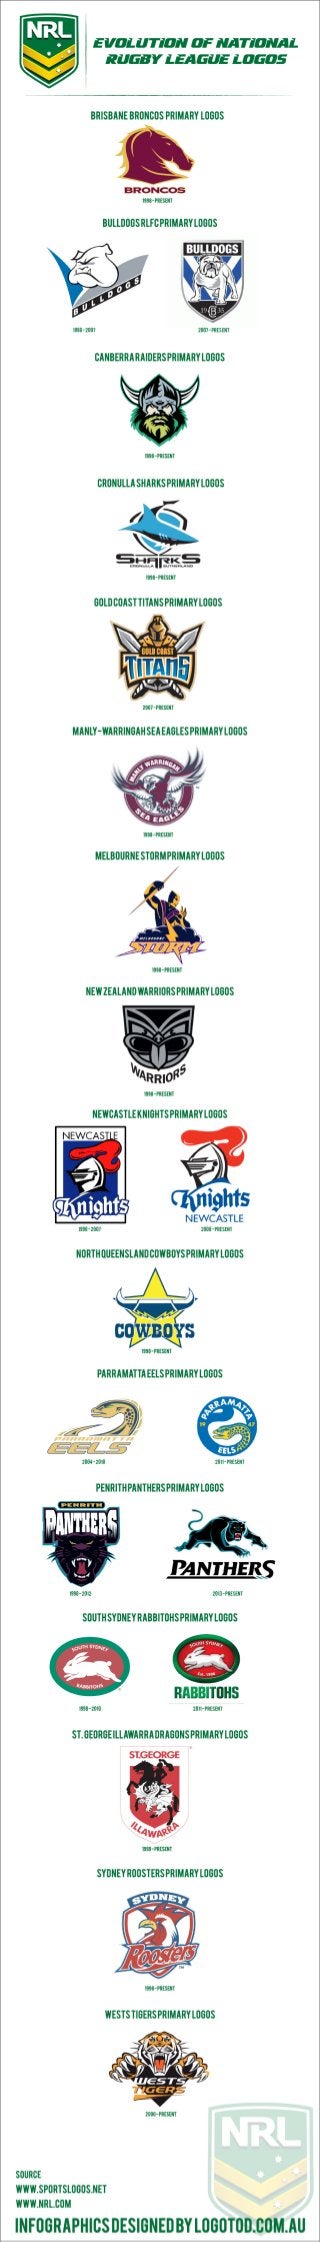 Evolution of National Rugby League Logo Designs